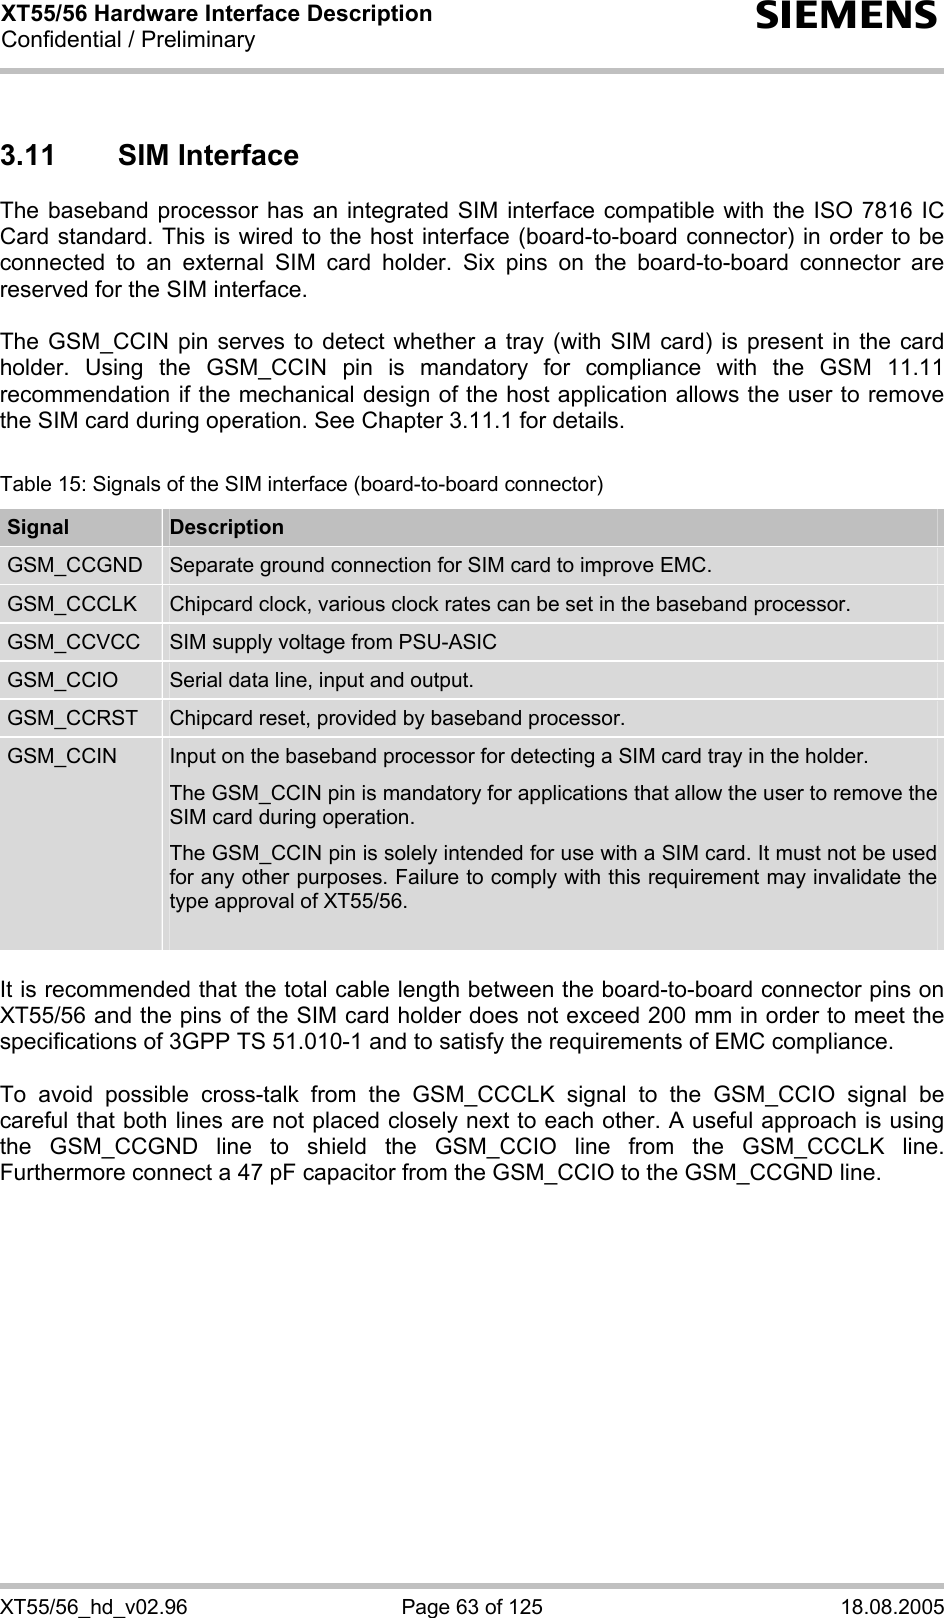 XT55/56 Hardware Interface Description Confidential / Preliminary s XT55/56_hd_v02.96  Page 63 of 125  18.08.2005 3.11 SIM Interface The baseband processor has an integrated SIM interface compatible with the ISO 7816 IC Card standard. This is wired to the host interface (board-to-board connector) in order to be connected to an external SIM card holder. Six pins on the board-to-board connector are reserved for the SIM interface.   The GSM_CCIN pin serves to detect whether a tray (with SIM card) is present in the card holder. Using the GSM_CCIN pin is mandatory for compliance with the GSM 11.11 recommendation if the mechanical design of the host application allows the user to remove the SIM card during operation. See Chapter 3.11.1 for details.  Table 15: Signals of the SIM interface (board-to-board connector) Signal  Description GSM_CCGND  Separate ground connection for SIM card to improve EMC. GSM_CCCLK  Chipcard clock, various clock rates can be set in the baseband processor. GSM_CCVCC  SIM supply voltage from PSU-ASIC GSM_CCIO  Serial data line, input and output. GSM_CCRST  Chipcard reset, provided by baseband processor. GSM_CCIN  Input on the baseband processor for detecting a SIM card tray in the holder. The GSM_CCIN pin is mandatory for applications that allow the user to remove the SIM card during operation.  The GSM_CCIN pin is solely intended for use with a SIM card. It must not be used for any other purposes. Failure to comply with this requirement may invalidate the type approval of XT55/56.   It is recommended that the total cable length between the board-to-board connector pins on XT55/56 and the pins of the SIM card holder does not exceed 200 mm in order to meet the specifications of 3GPP TS 51.010-1 and to satisfy the requirements of EMC compliance.  To avoid possible cross-talk from the GSM_CCCLK signal to the GSM_CCIO signal be careful that both lines are not placed closely next to each other. A useful approach is using the GSM_CCGND line to shield the GSM_CCIO line from the GSM_CCCLK line. Furthermore connect a 47 pF capacitor from the GSM_CCIO to the GSM_CCGND line. 